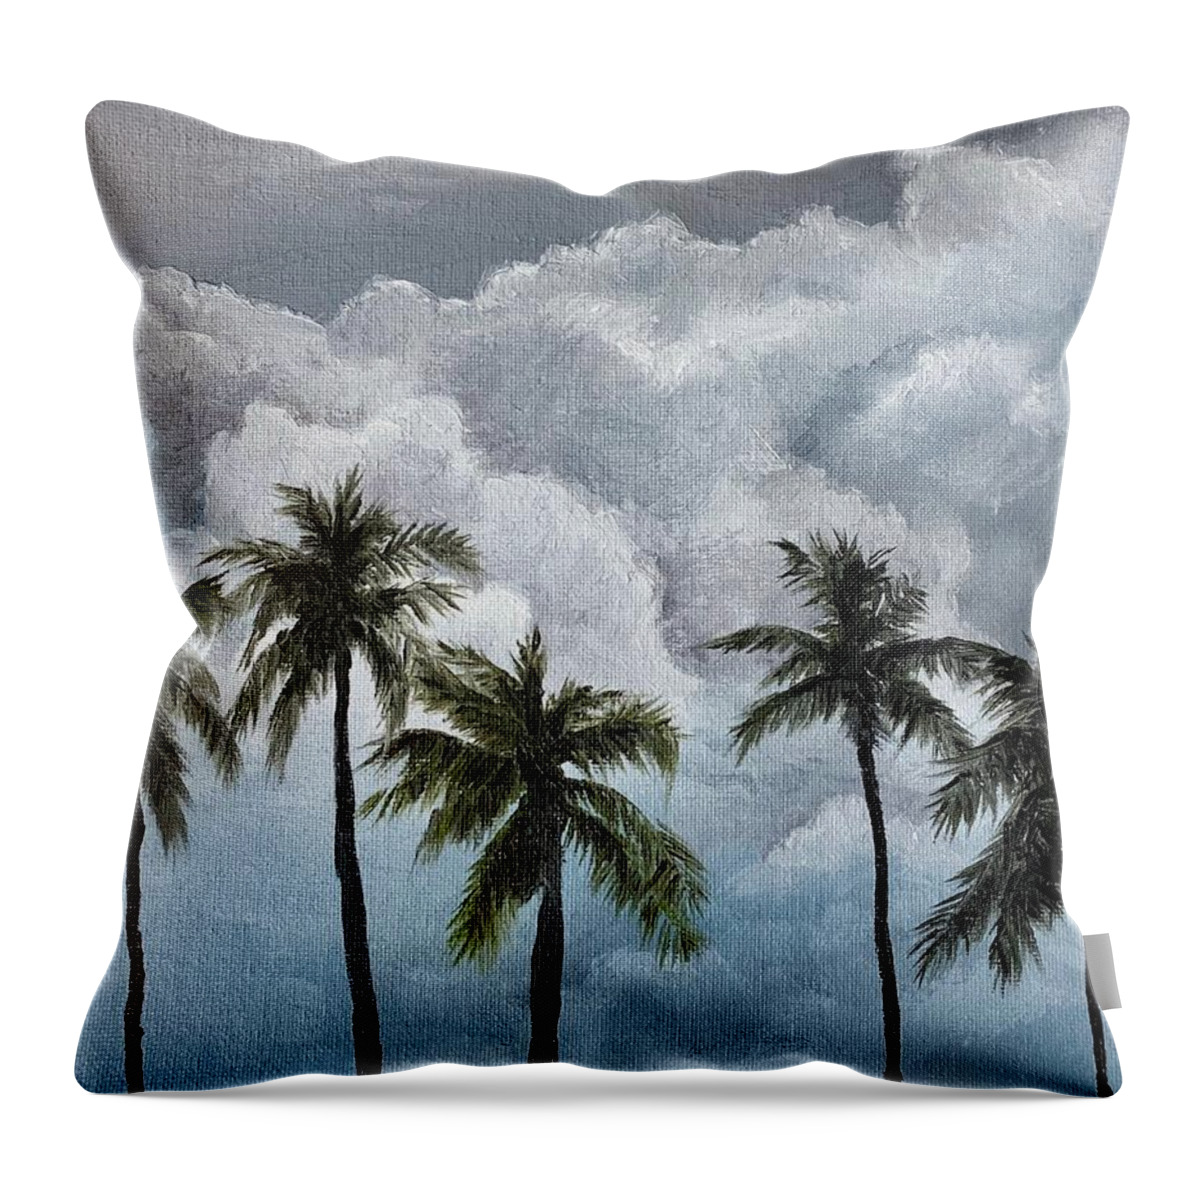 Miami Throw Pillow featuring the painting 5 Palm Trees by Steph Moraca